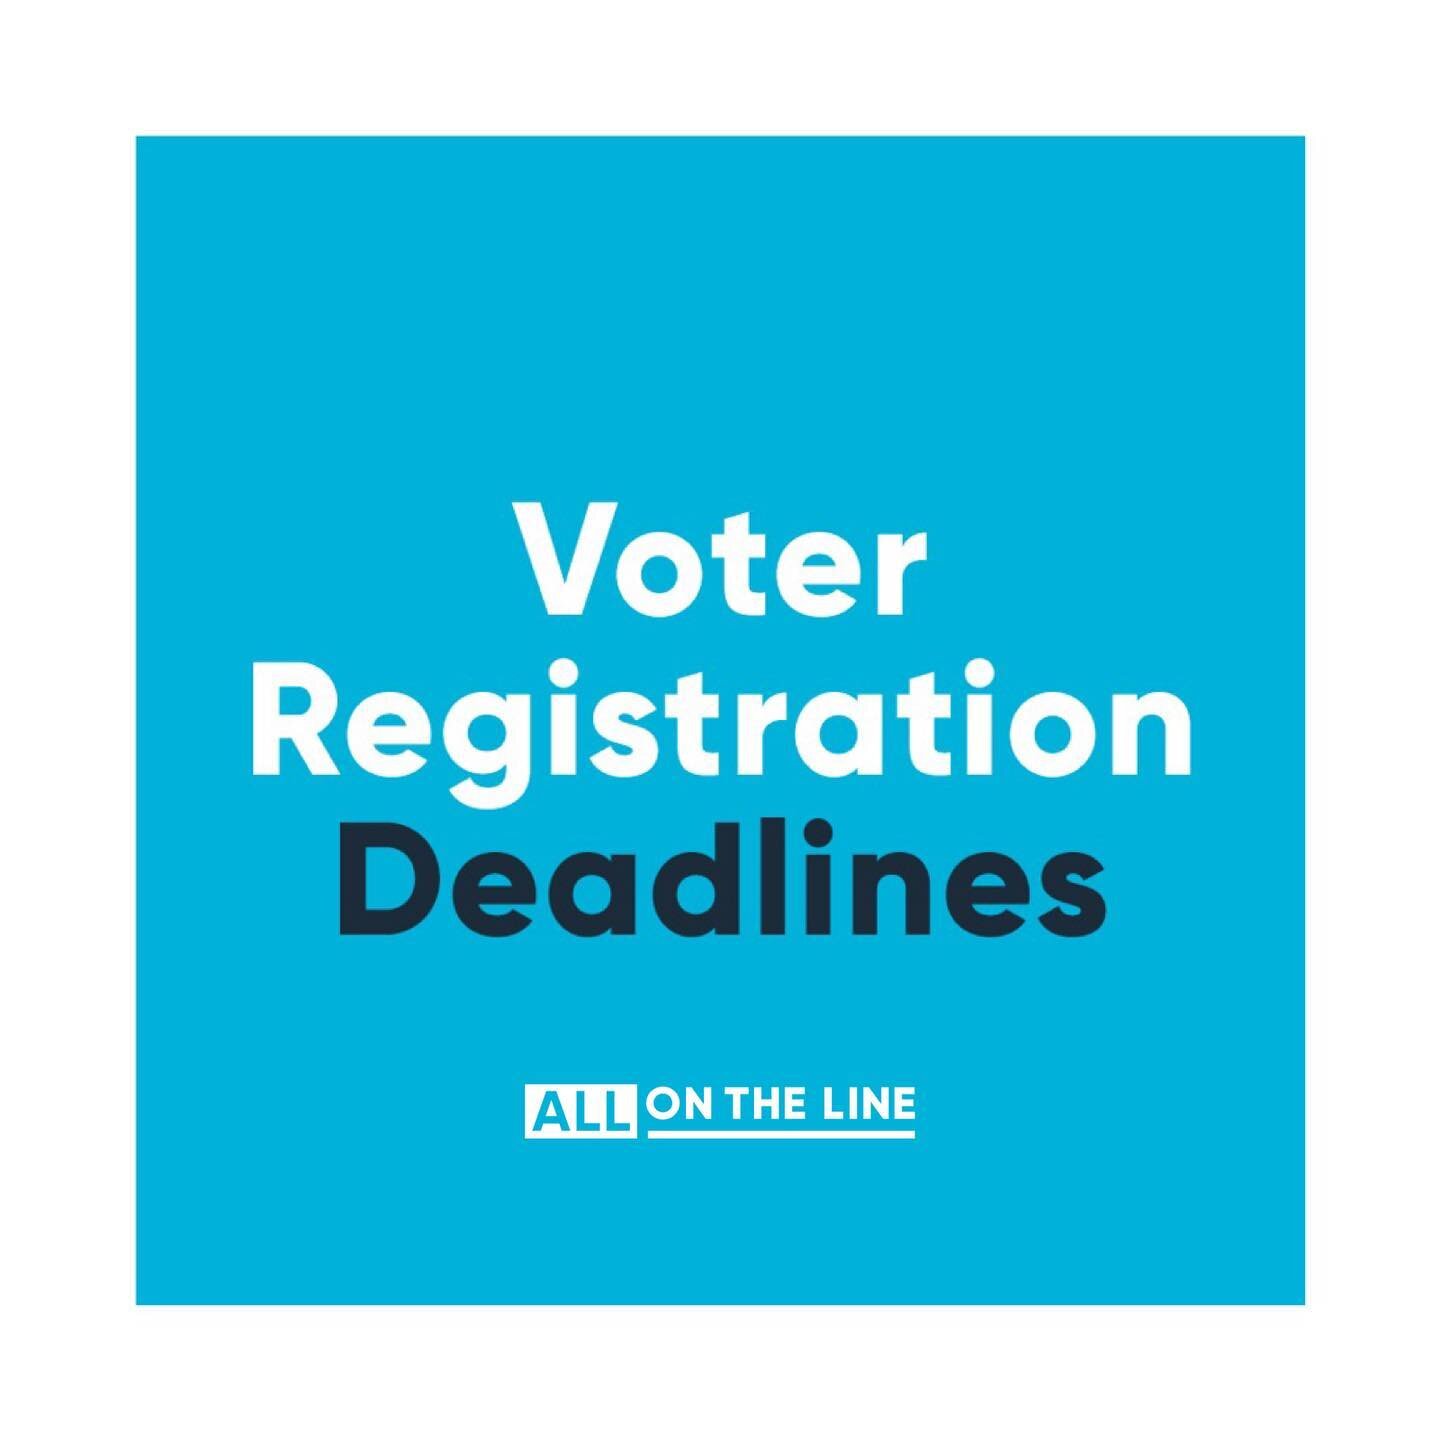 Voter registration deadlines are different in each state! Make sure you know your state&rsquo;s deadline to register to vote (swipe right for dates 👉🏾) and get it done with the link in our bio! 💪🏿

DO NOT wait until the last minute to register 🙅